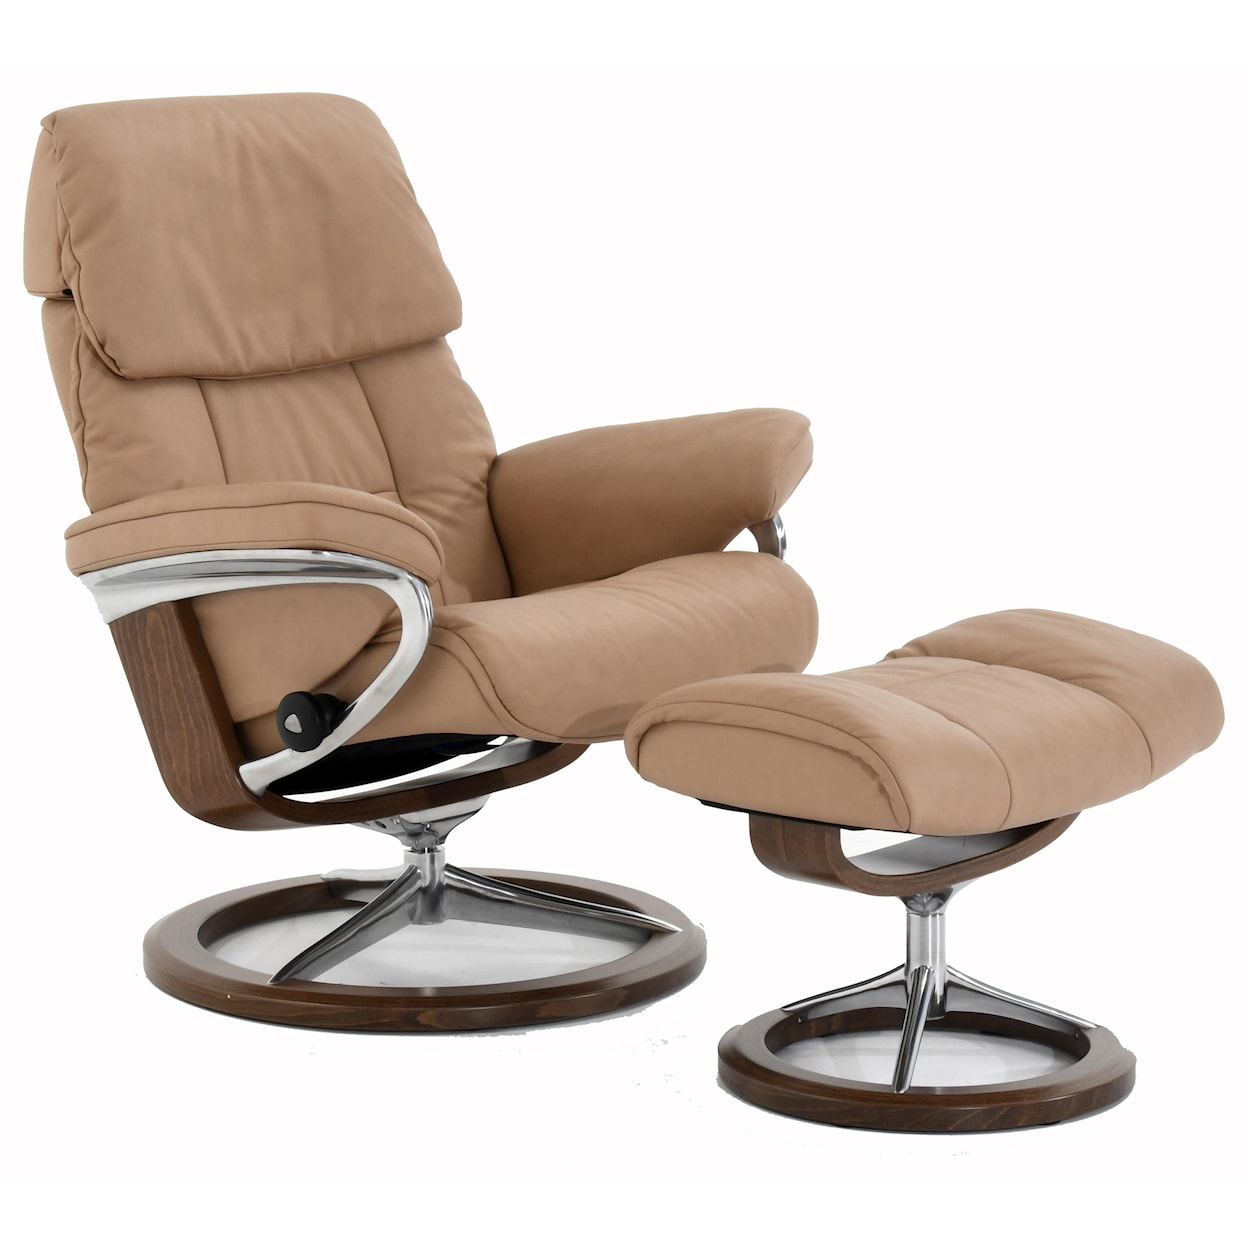 Stressless by Ekornes Stressless Ruby Large Signature Chair